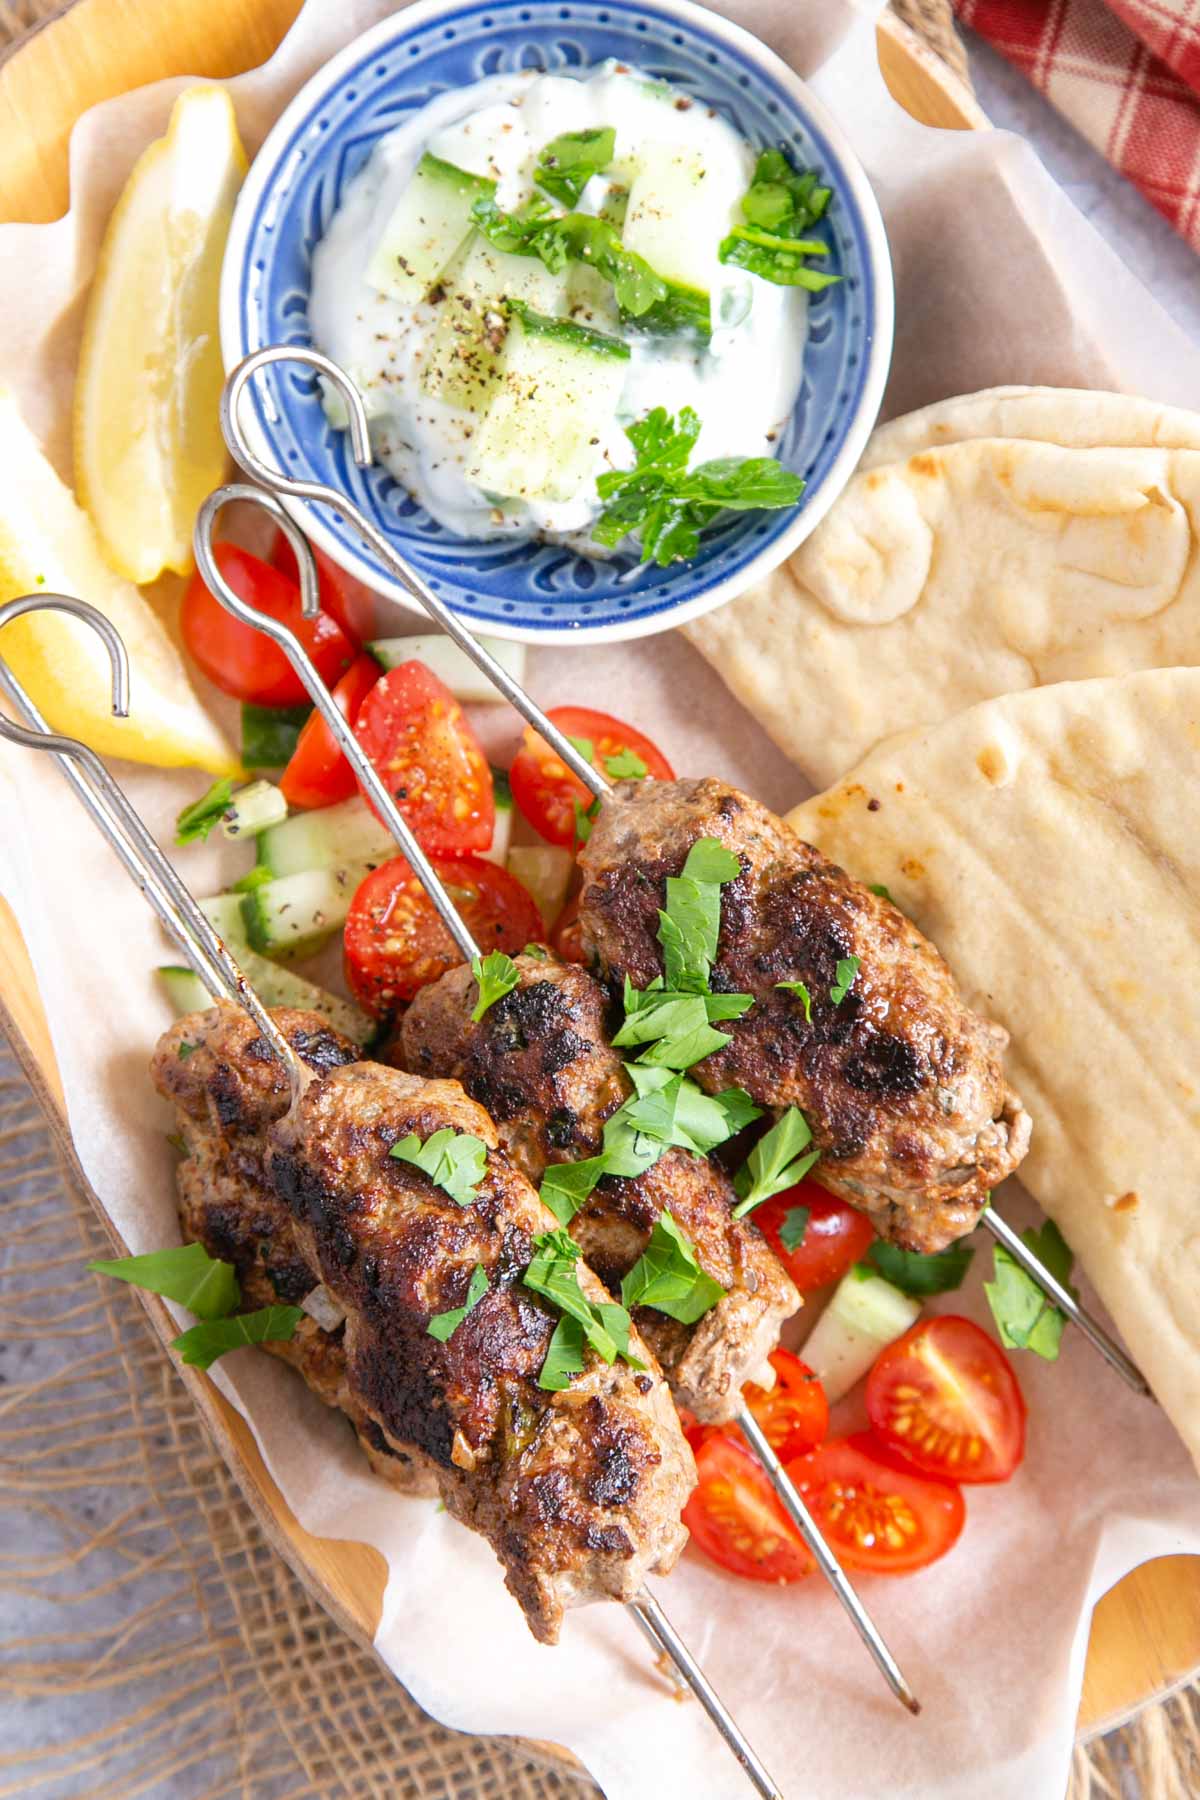 View from above of the lamb kofta skewers ready to serve with tzatziki, salad and bread.